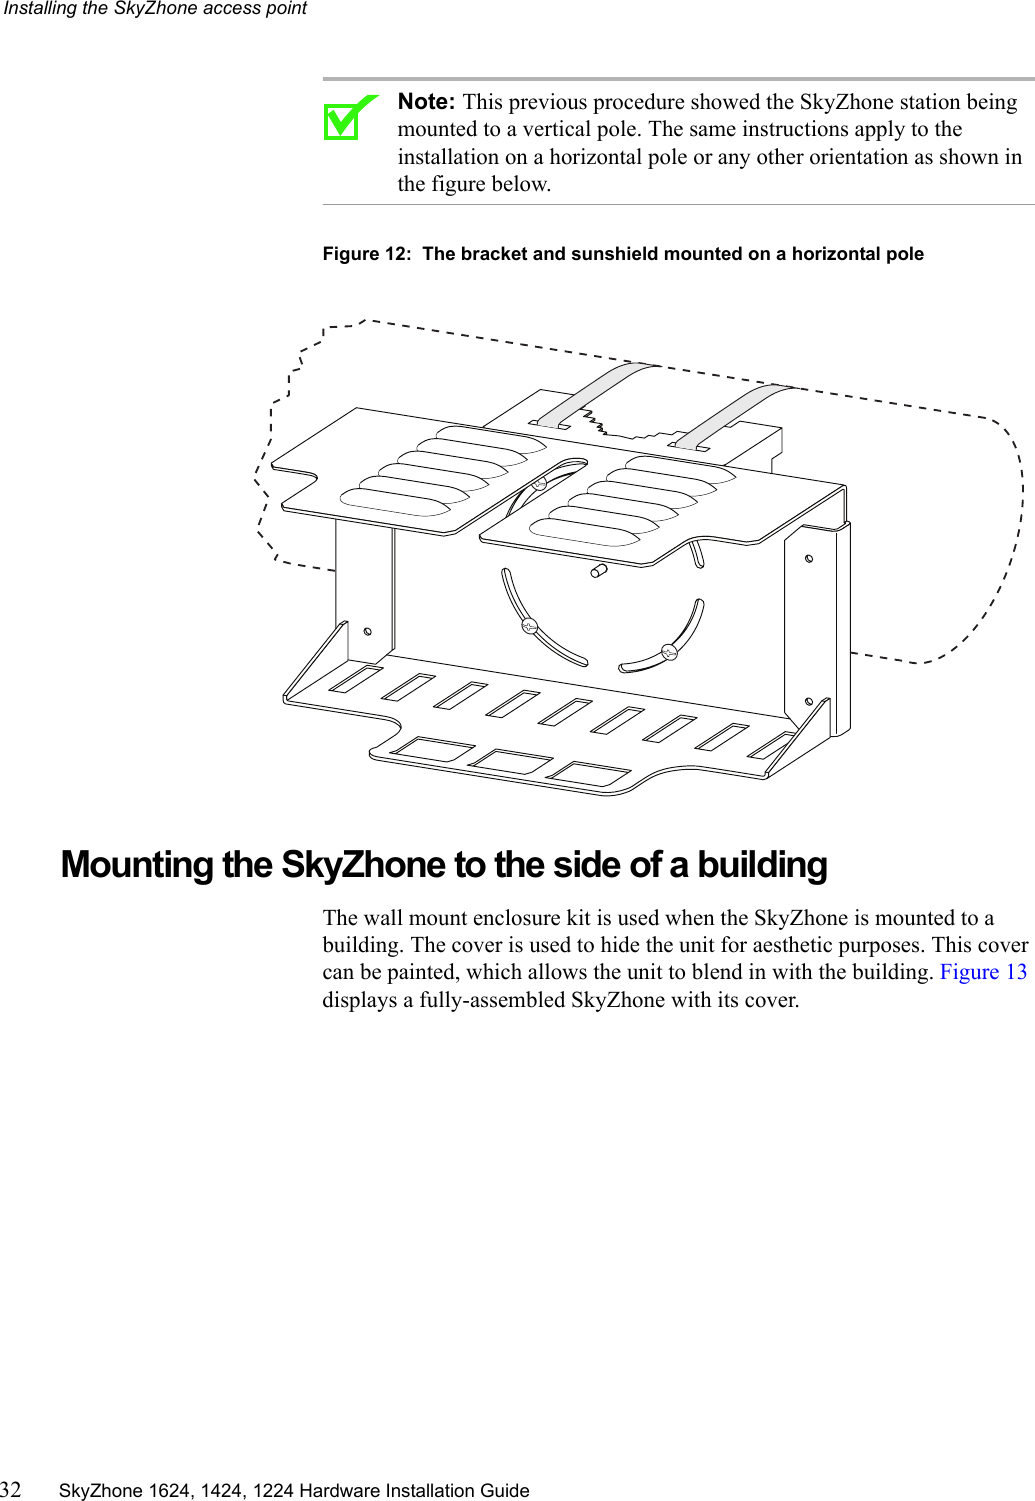 Installing the SkyZhone access point32 SkyZhone 1624, 1424, 1224 Hardware Installation GuideNote: This previous procedure showed the SkyZhone station being mounted to a vertical pole. The same instructions apply to the installation on a horizontal pole or any other orientation as shown in the figure below.Figure 12:  The bracket and sunshield mounted on a horizontal poleMounting the SkyZhone to the side of a buildingThe wall mount enclosure kit is used when the SkyZhone is mounted to a building. The cover is used to hide the unit for aesthetic purposes. This cover can be painted, which allows the unit to blend in with the building. Figure 13 displays a fully-assembled SkyZhone with its cover.